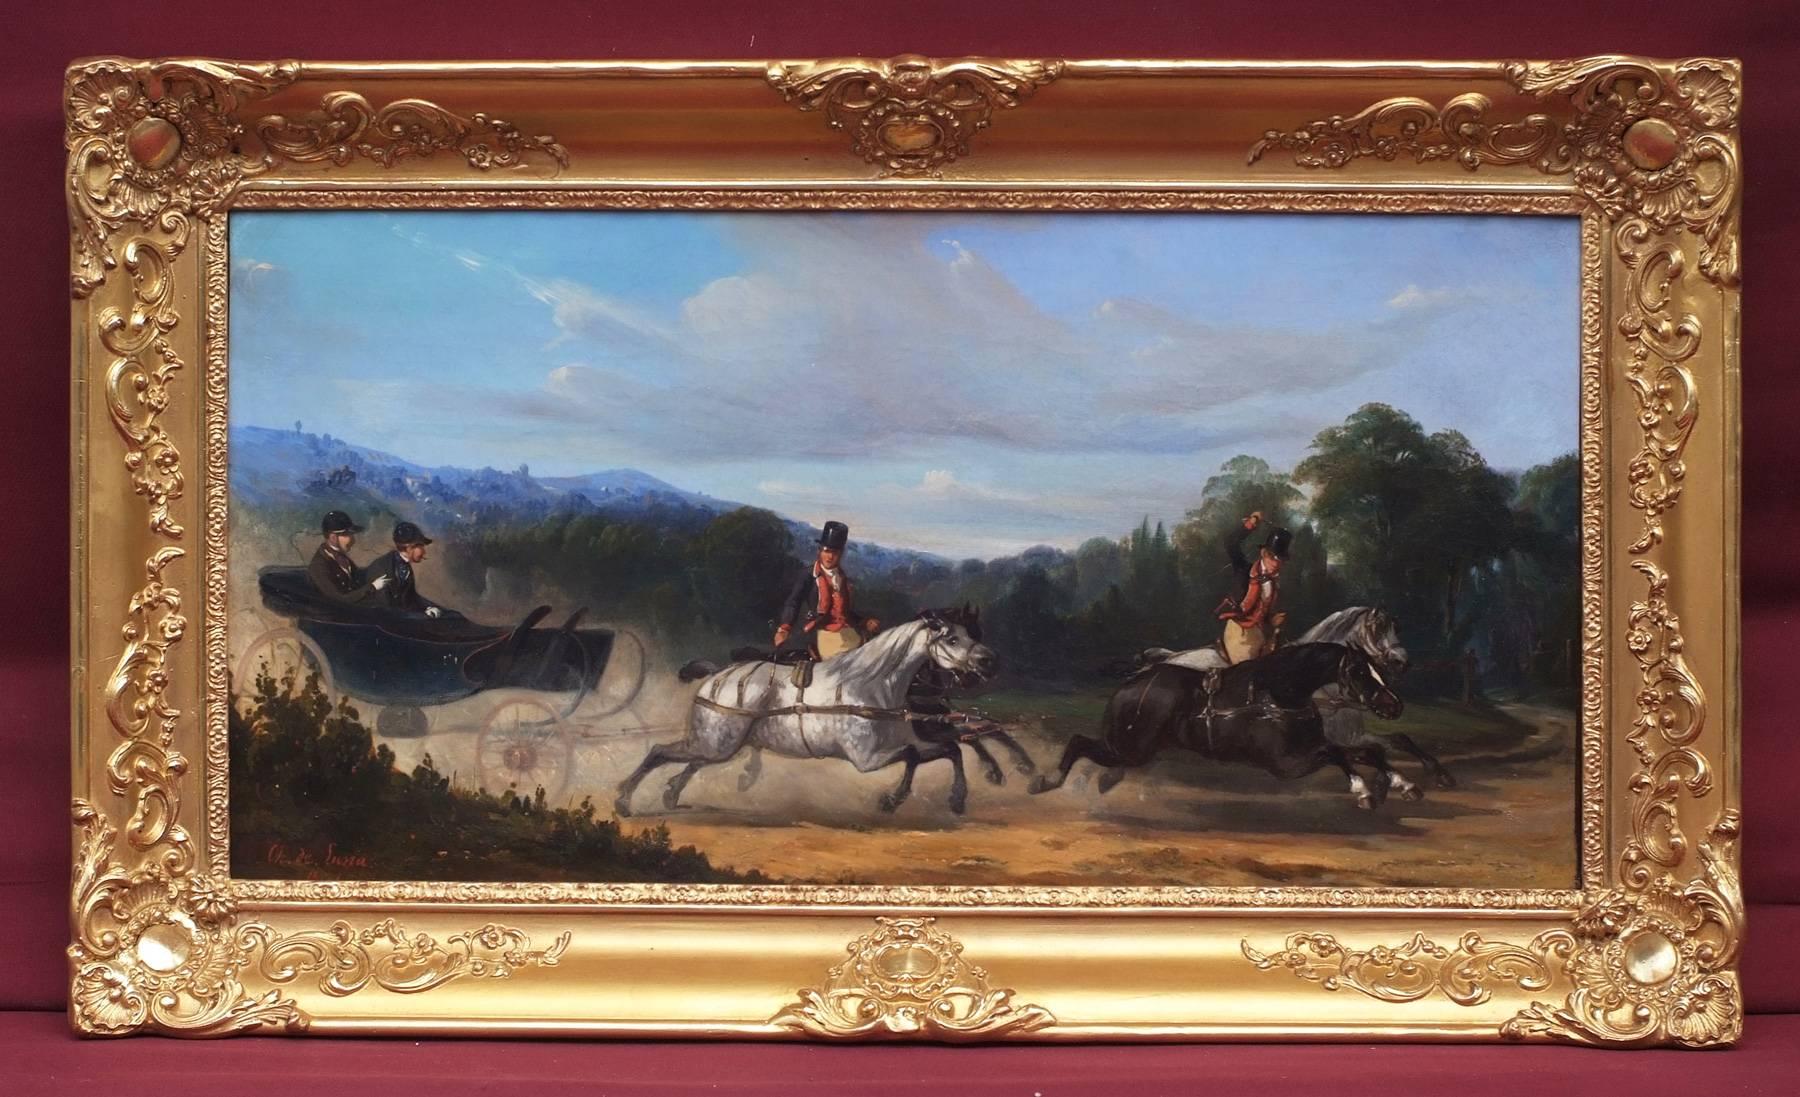 Painting 19th Century - Horses and Carriage - Charles de Luna (1812-1866) 